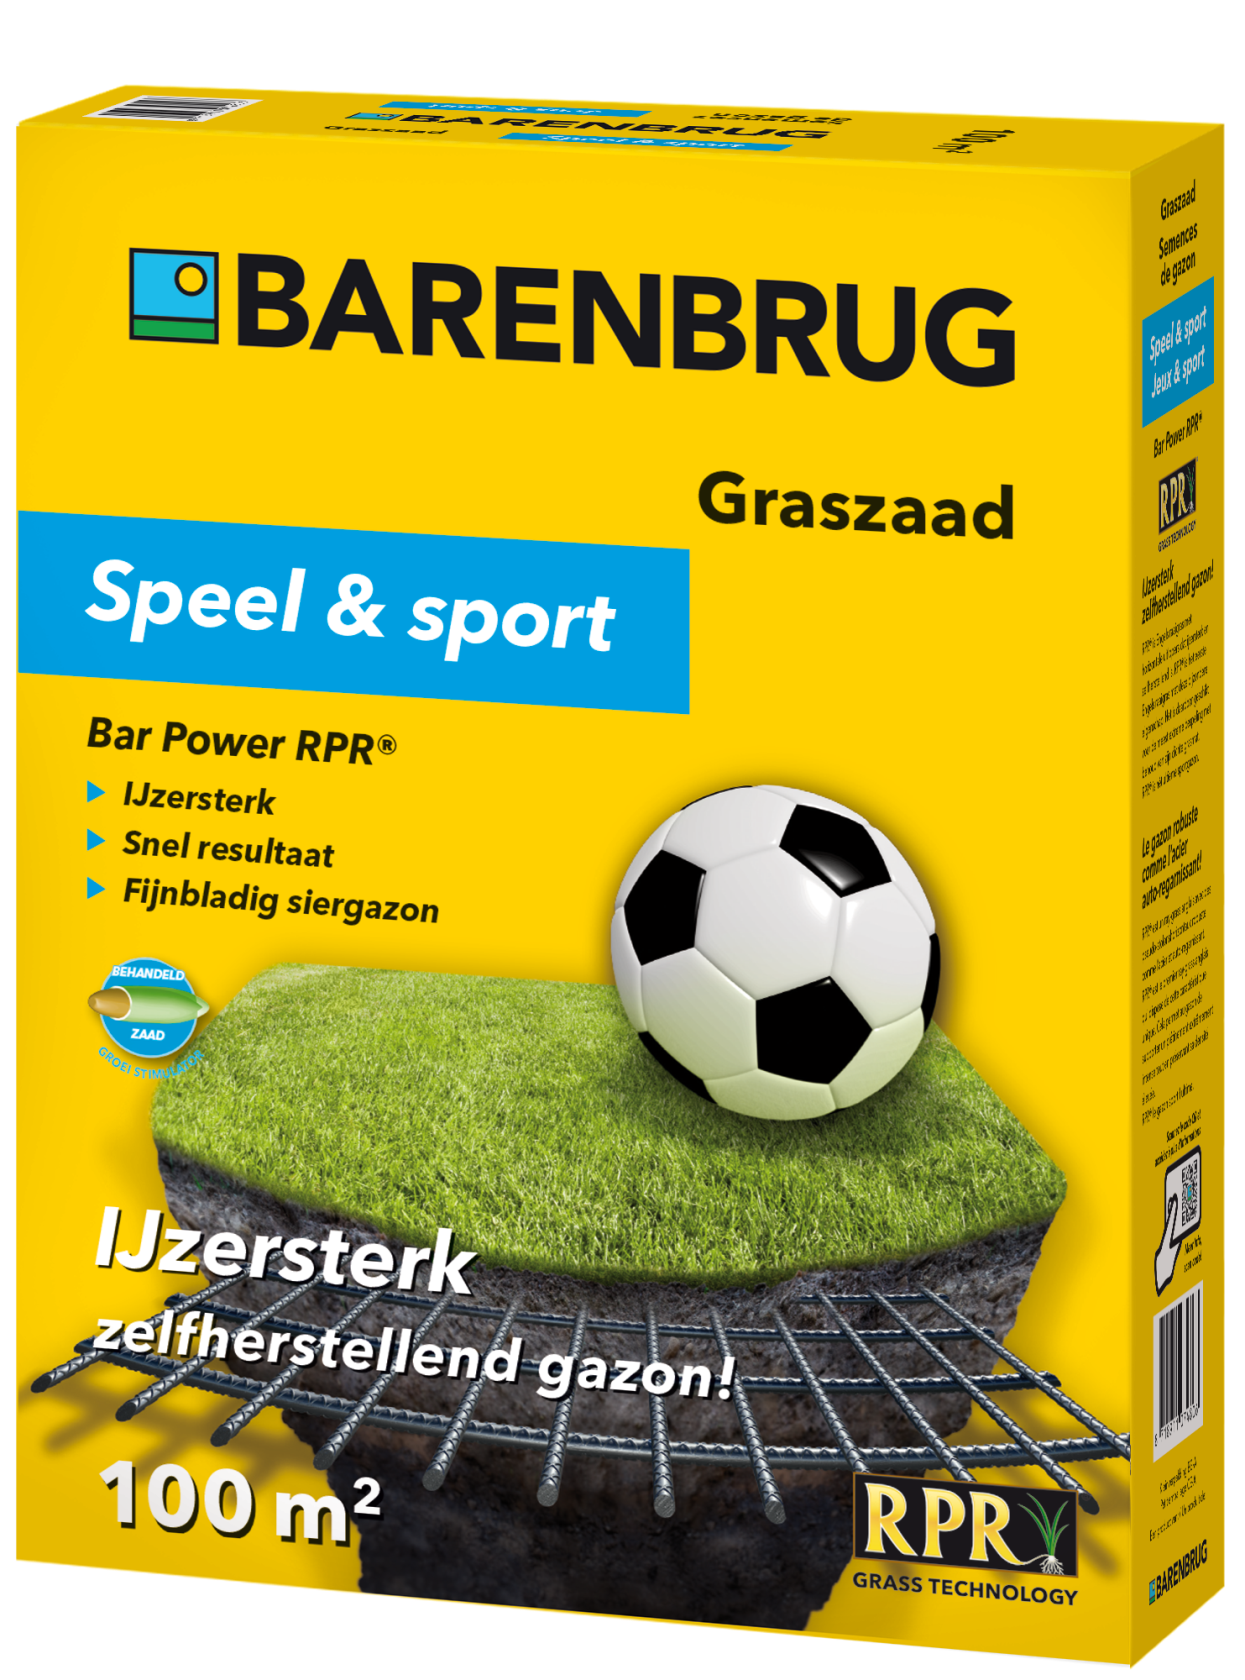 Barenbrug grass seed Bar Power RPR - extremely strong self-healing lawn - 2kg up to 100m²